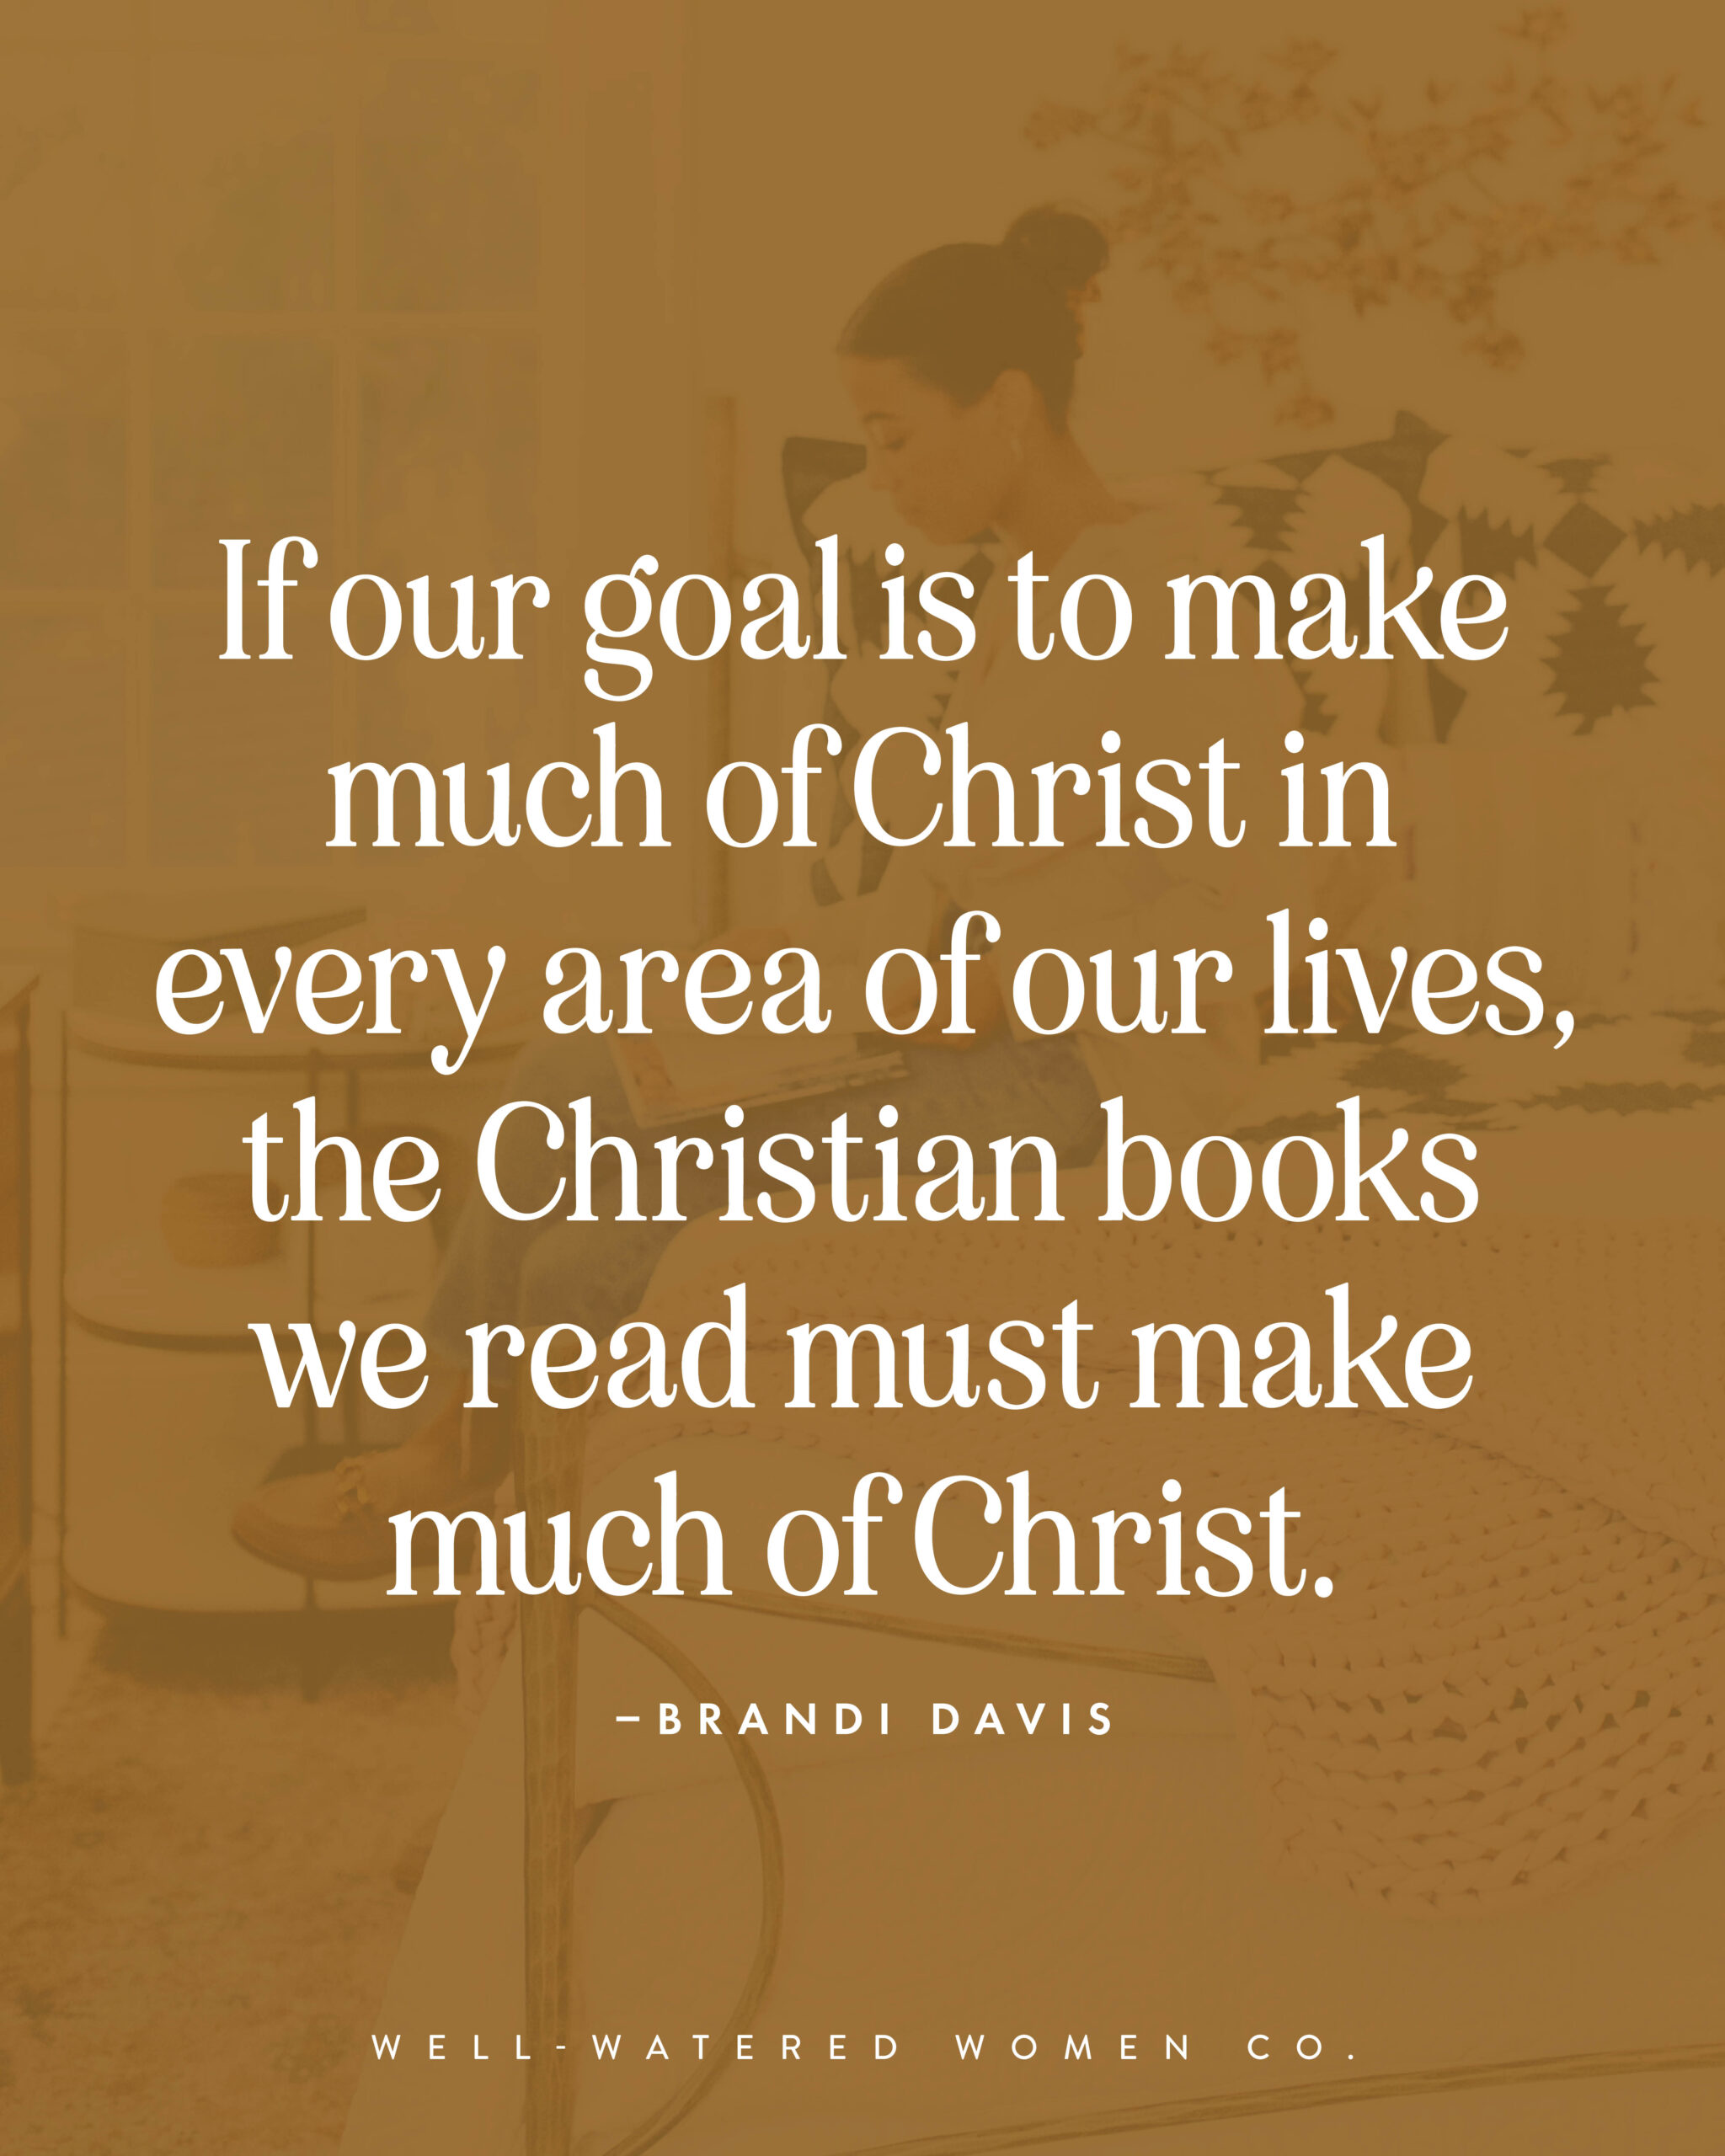 Becoming a Discerning Christian Reader - an article from Well-Watered Women - quote